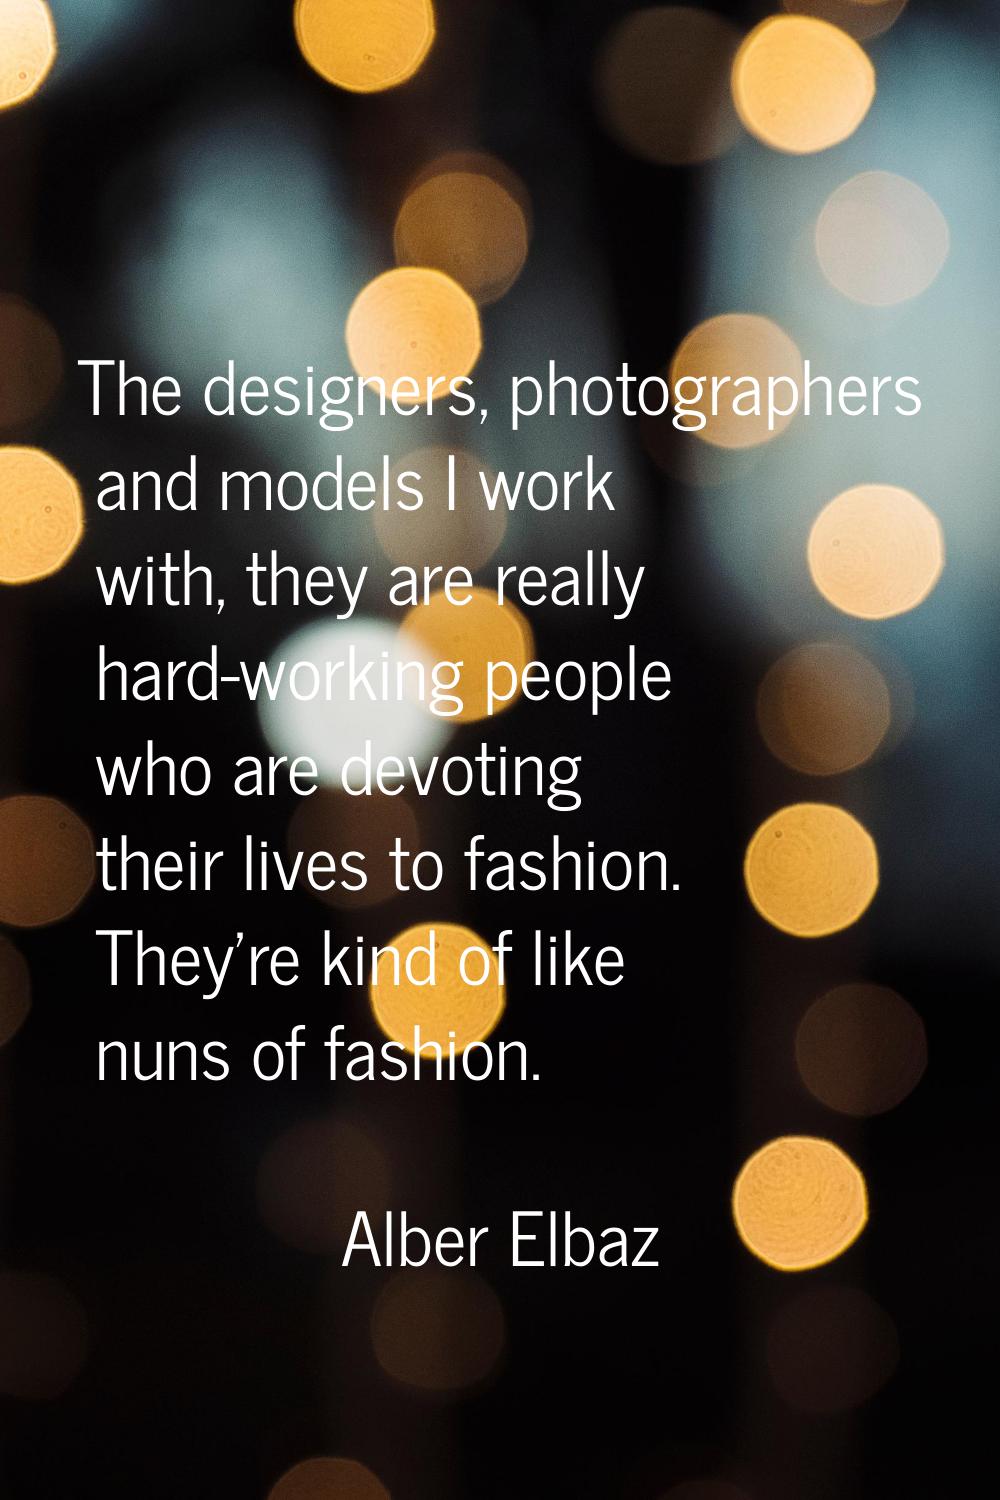 The designers, photographers and models I work with, they are really hard-working people who are de